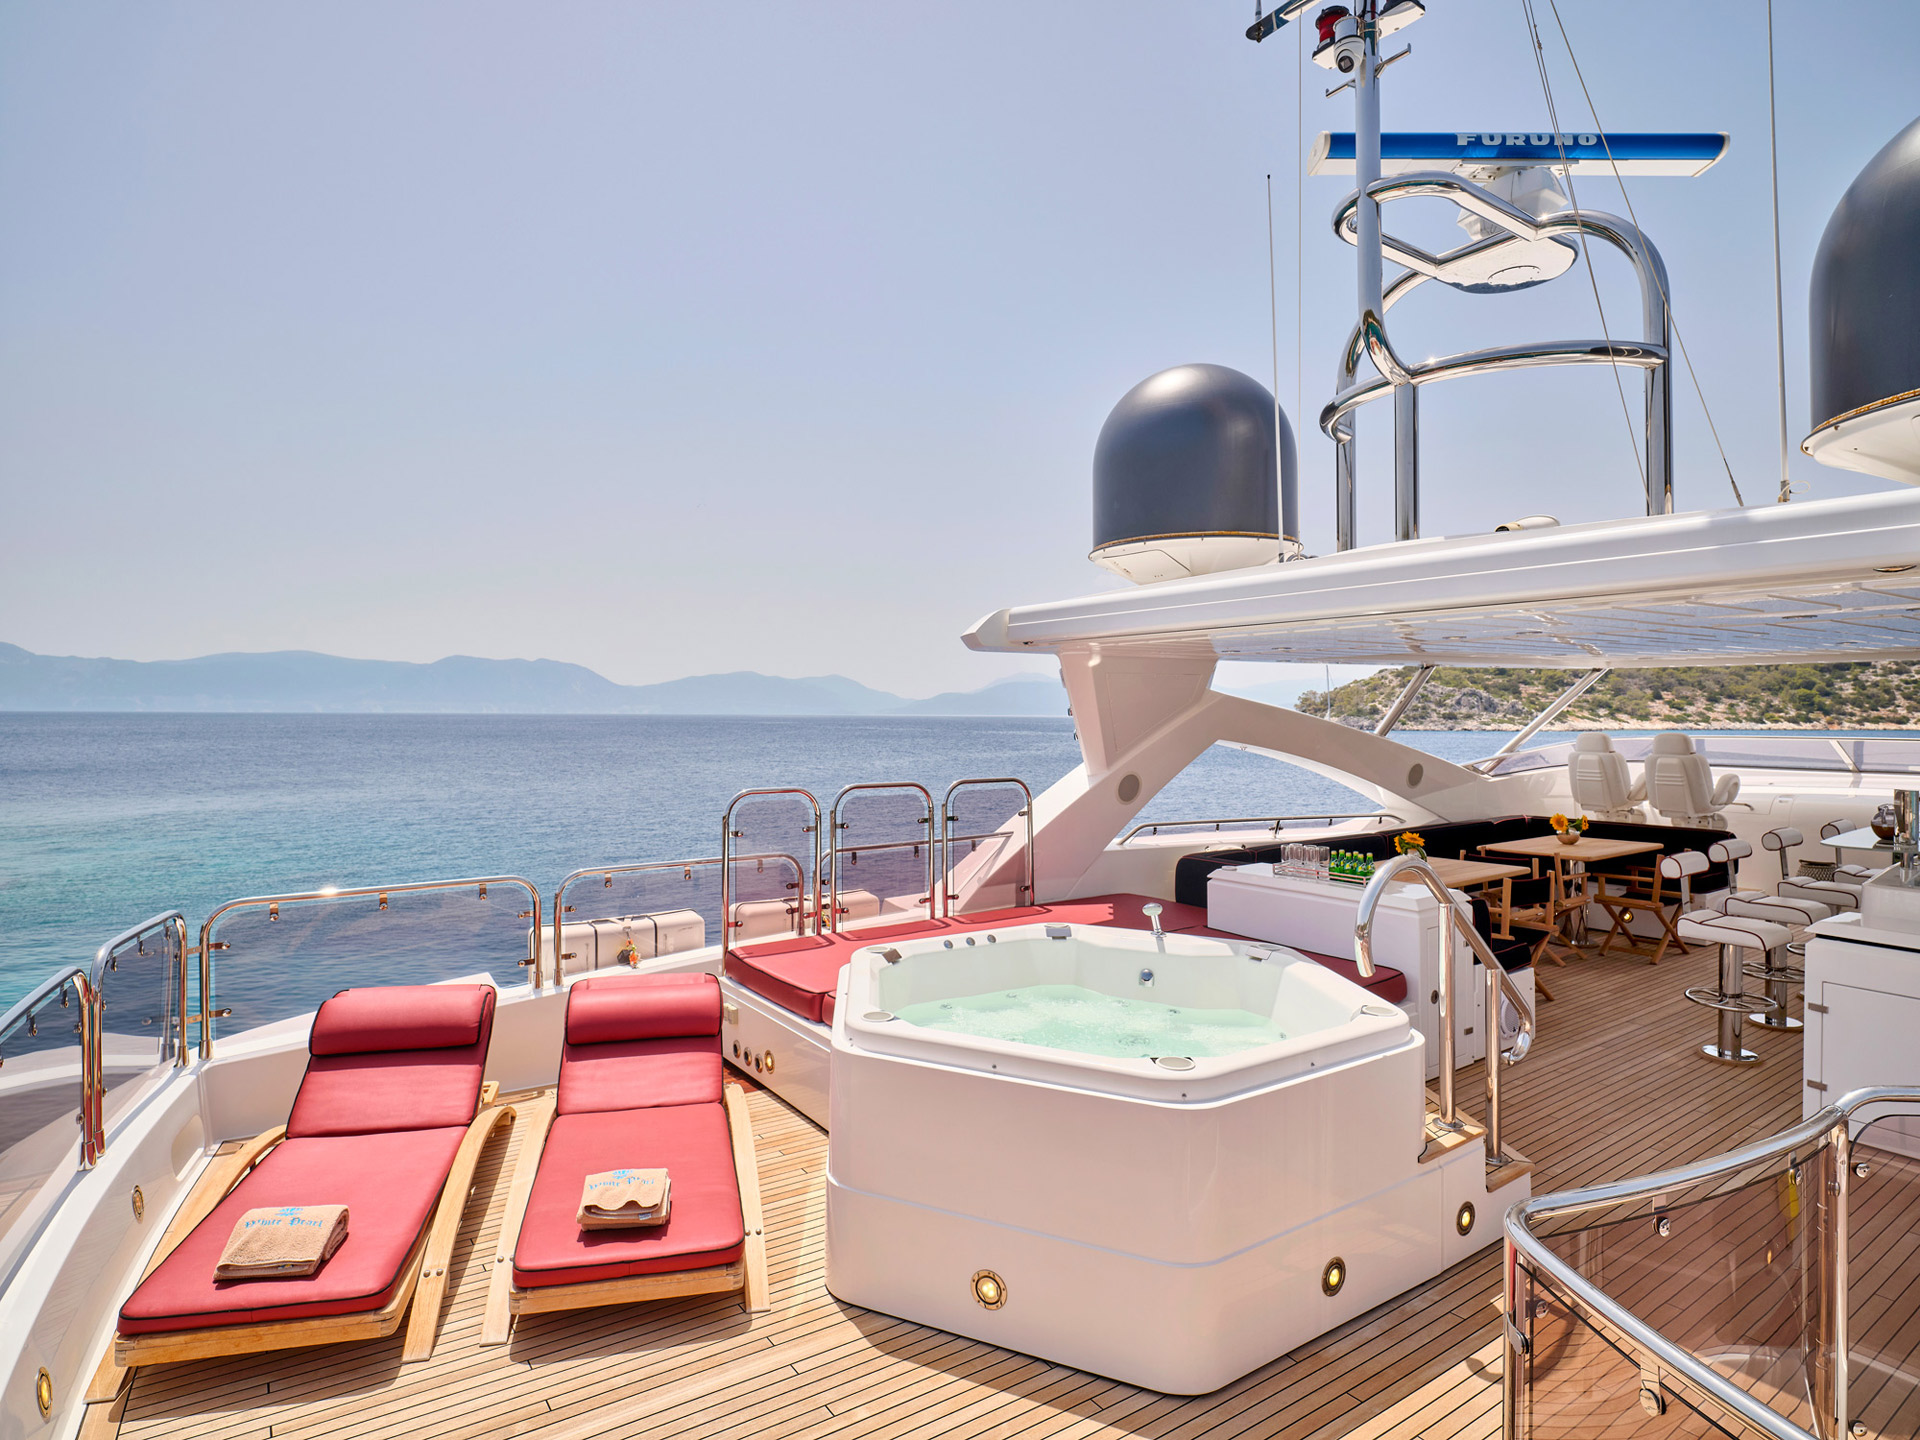 Sun deck jacuzzi and loungers